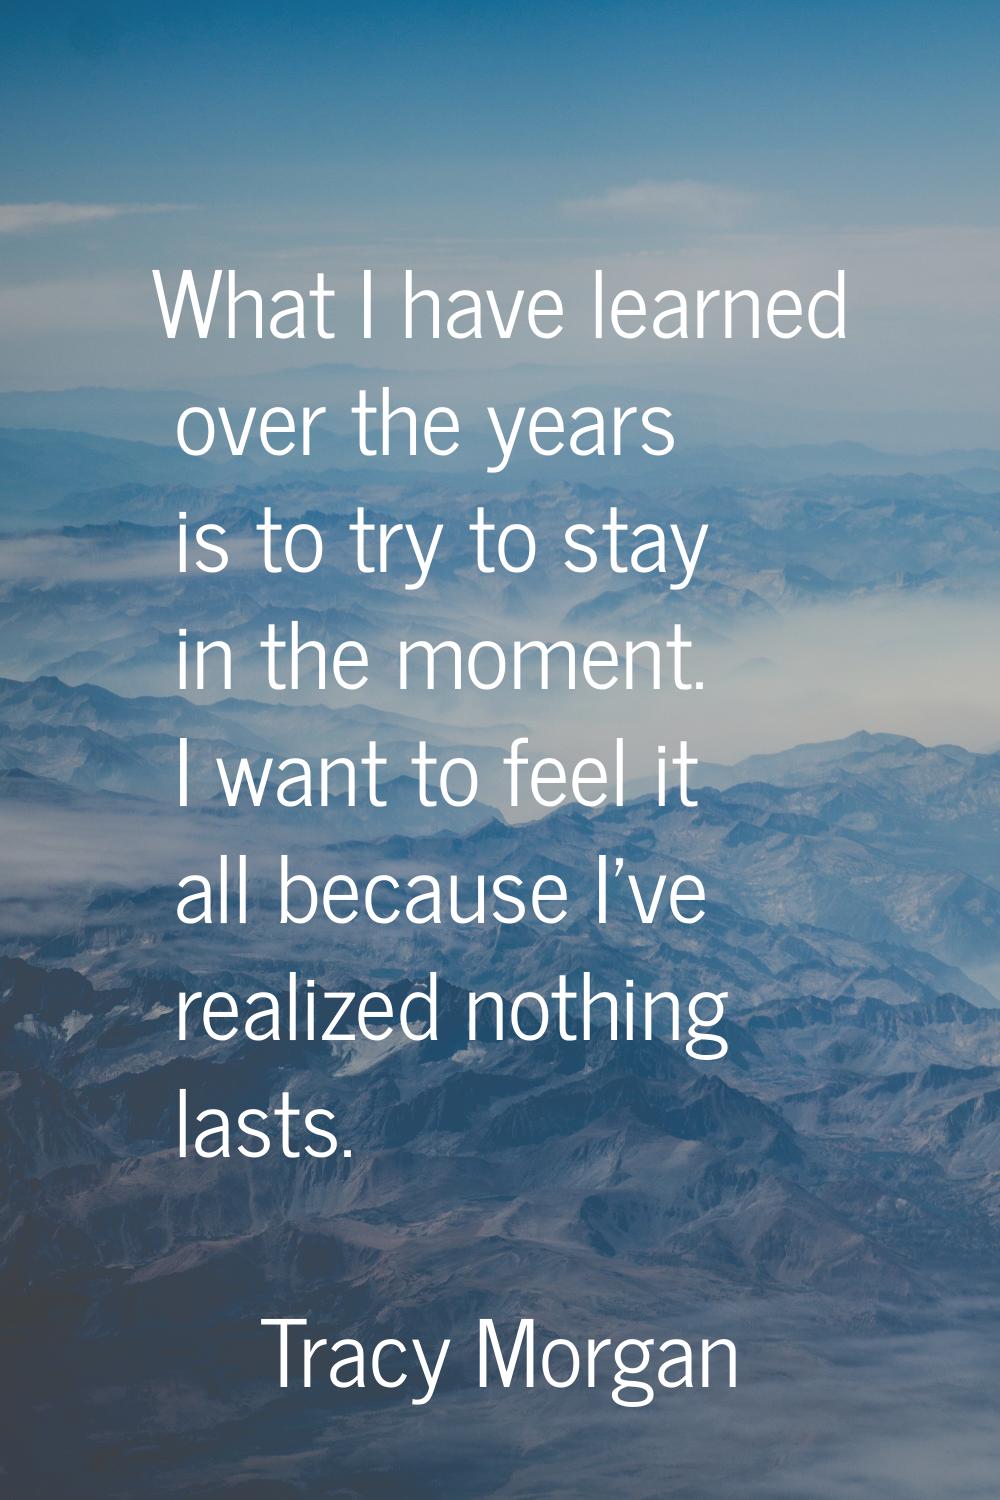 What I have learned over the years is to try to stay in the moment. I want to feel it all because I